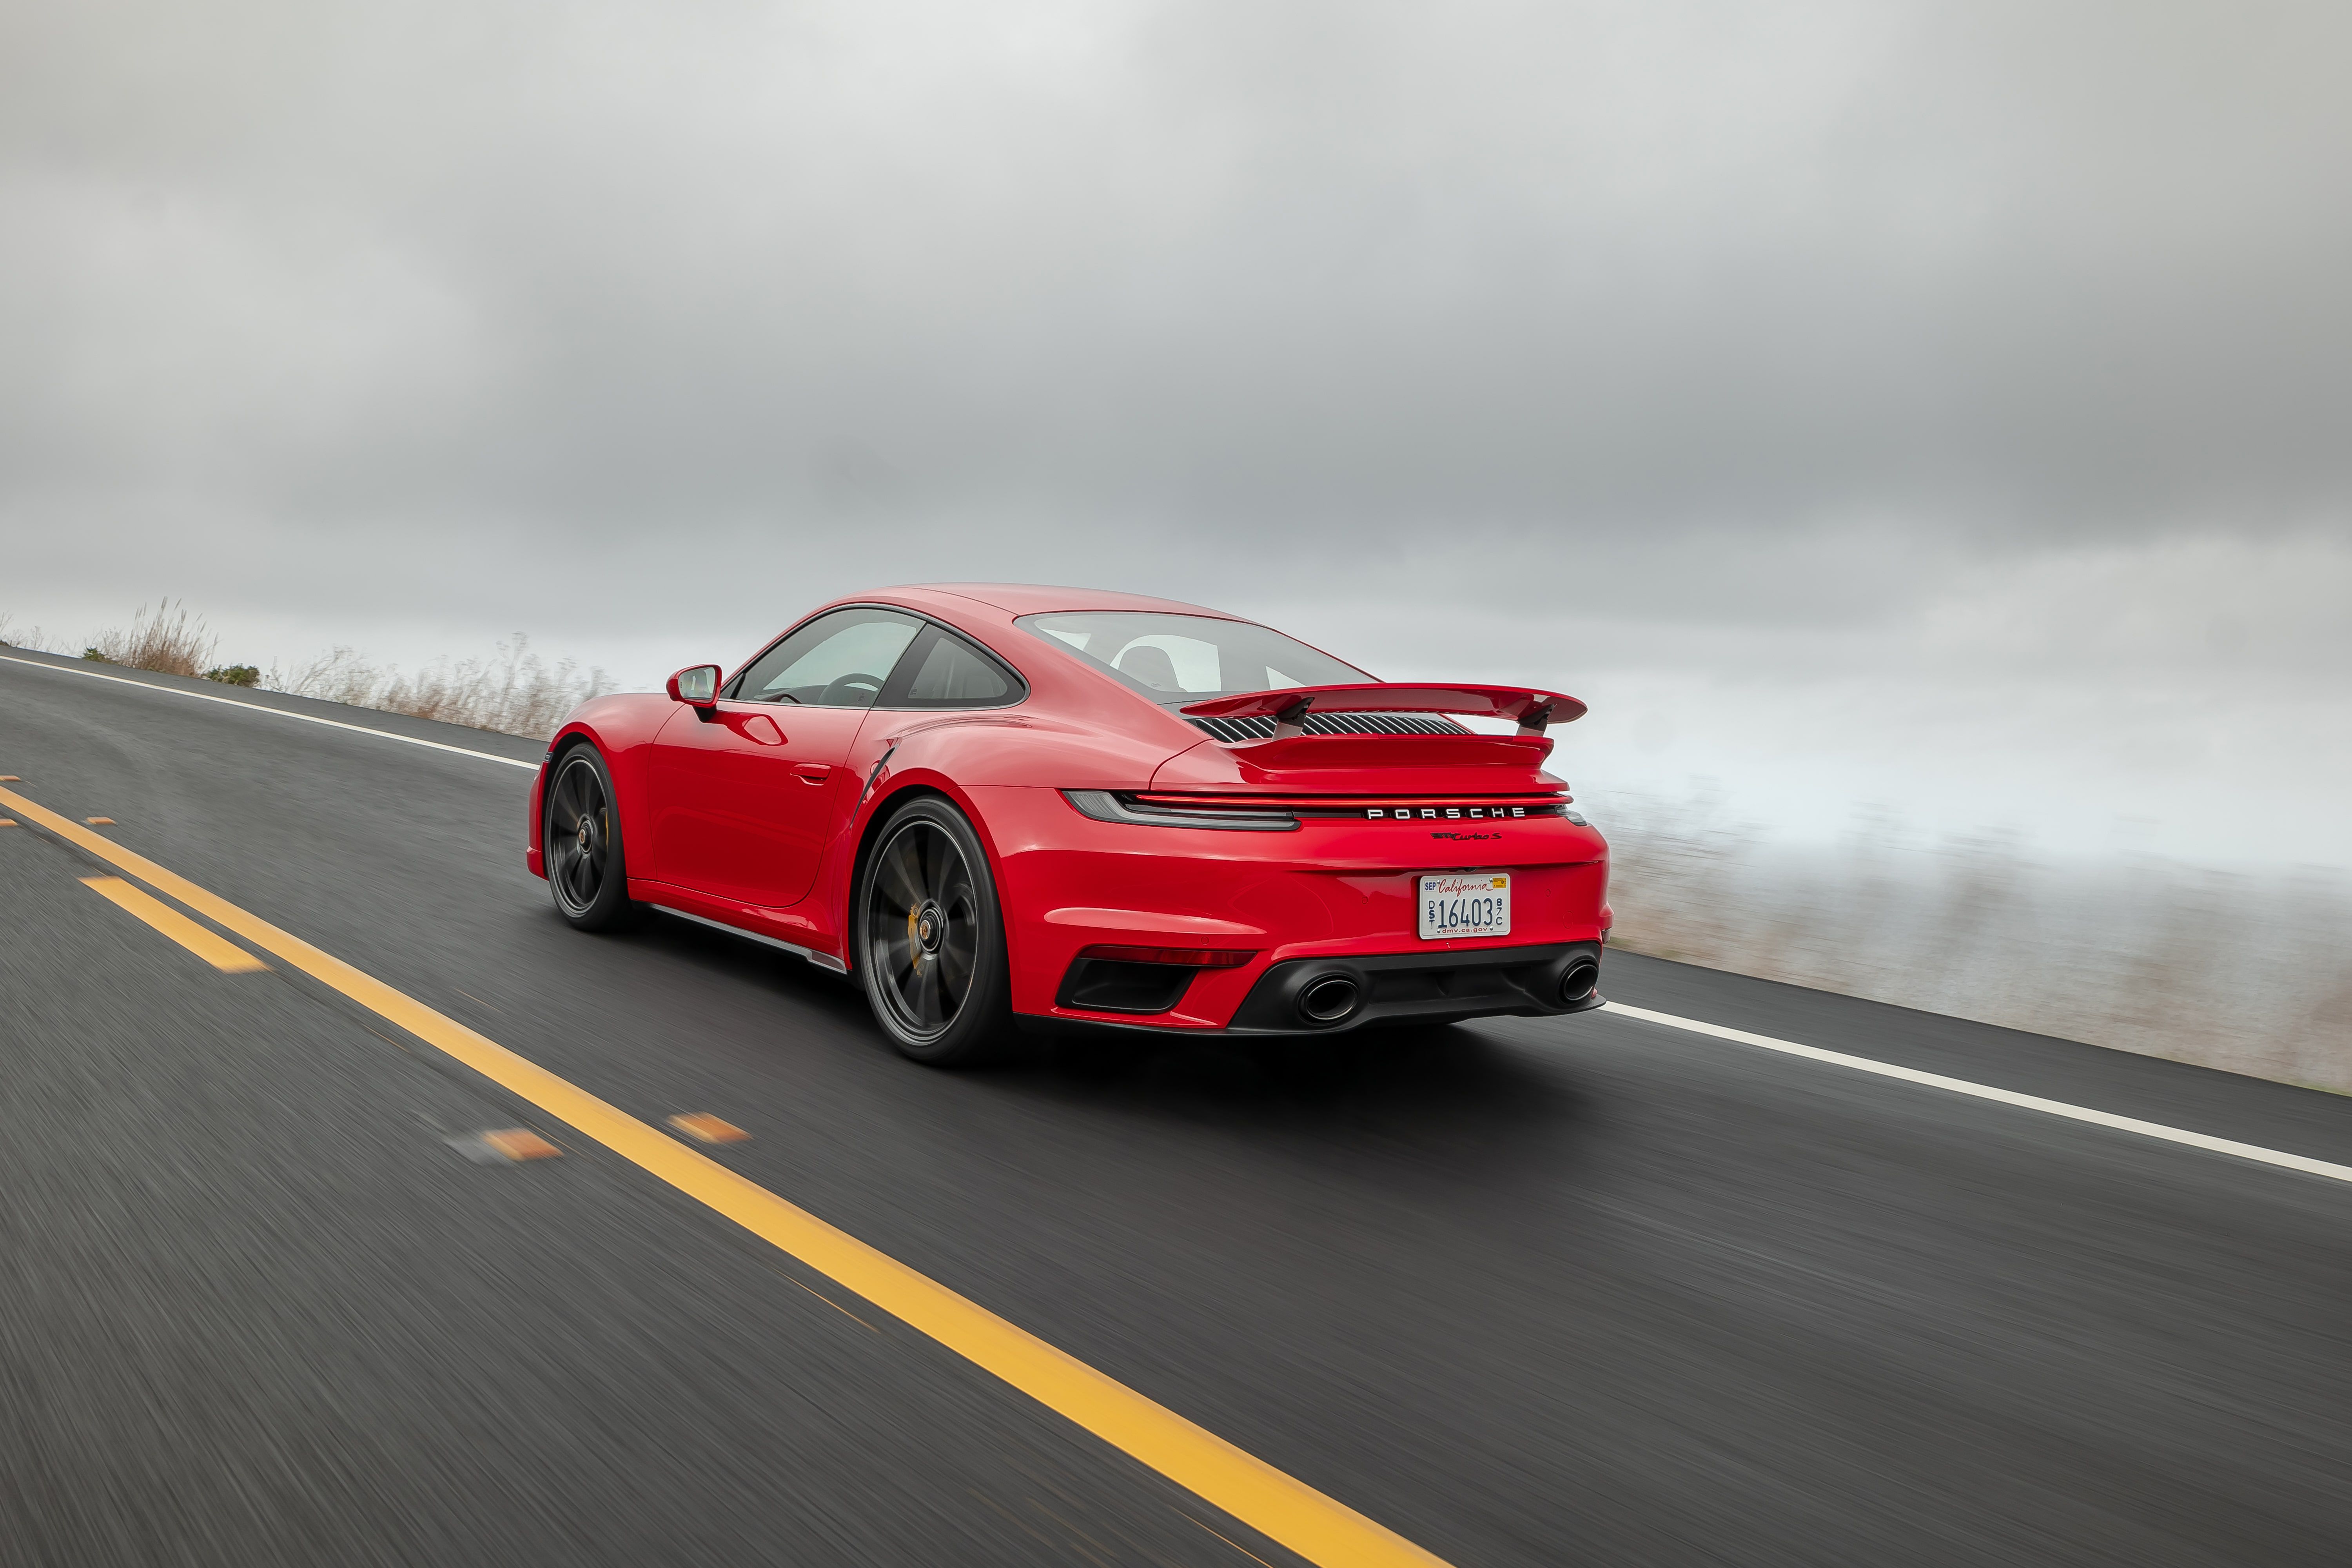 2021 Porsche 911 Turbo S: More Power, and the Best Handling Ever